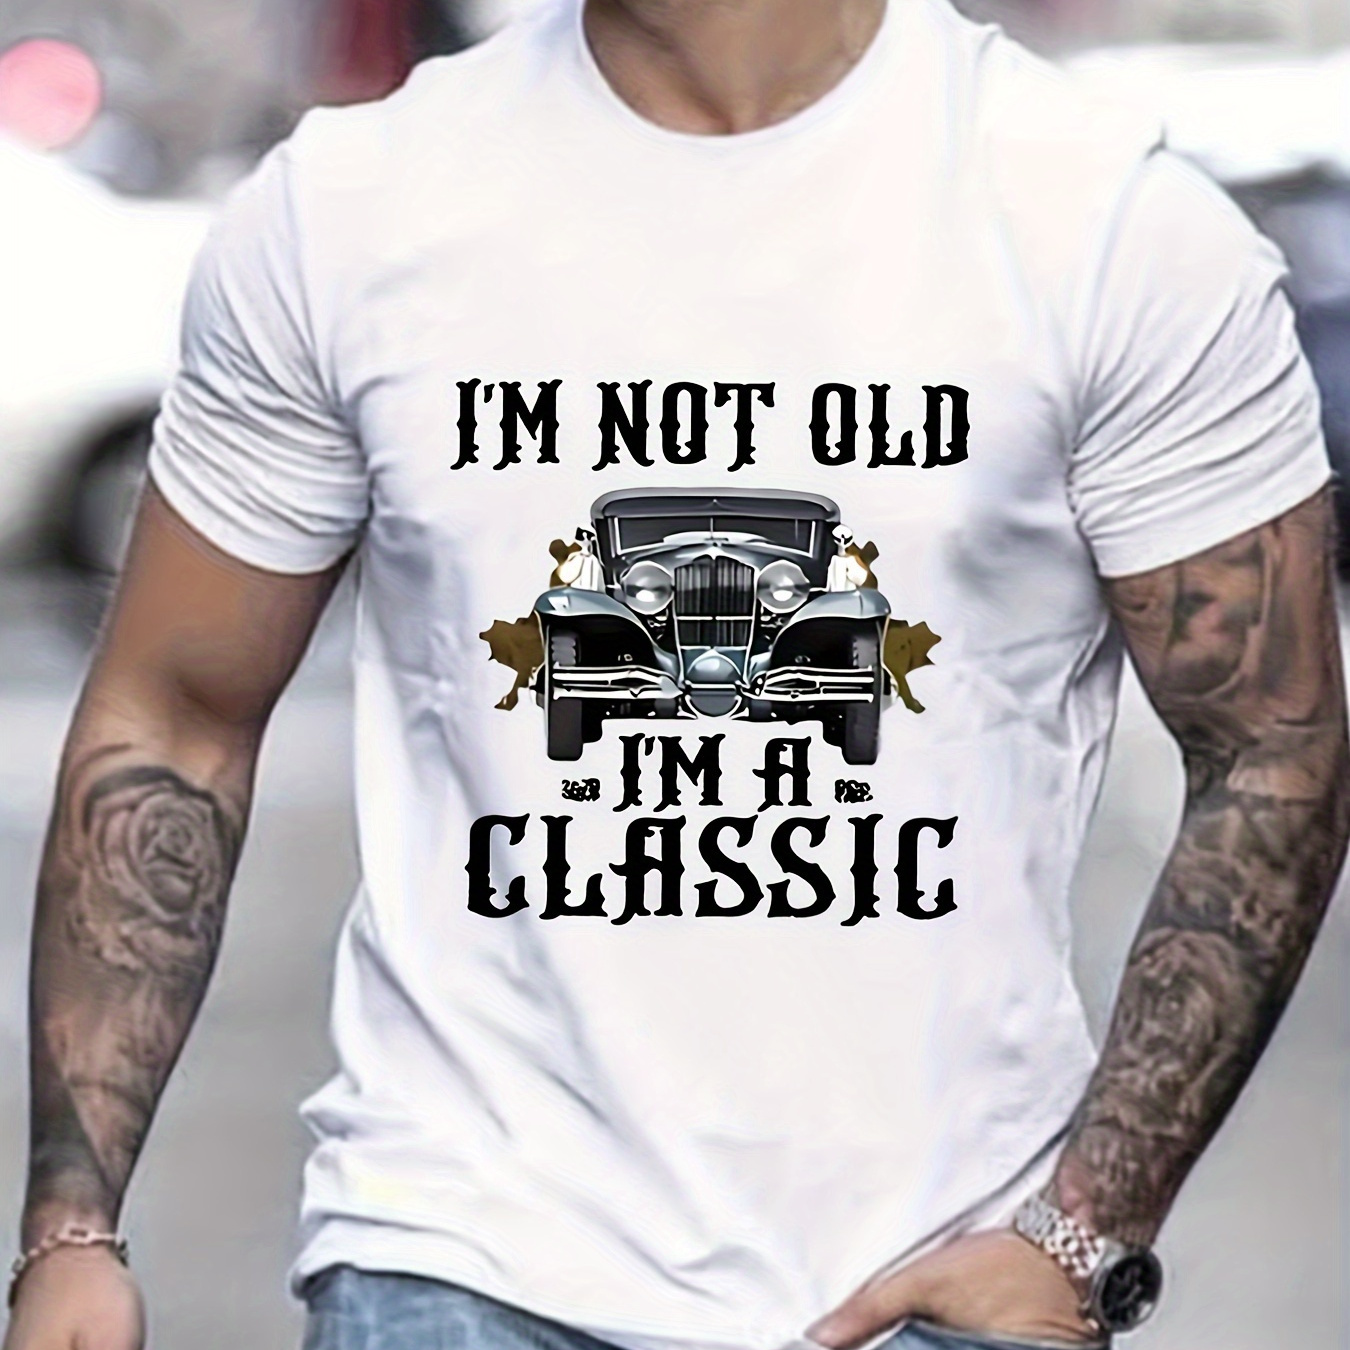 

I'm Not Old I'm Classic Letter Graphic Print Men's Creative Top, Casual Short Sleeve Crew Neck T-shirt, Men's Tee For Summer Outdoor